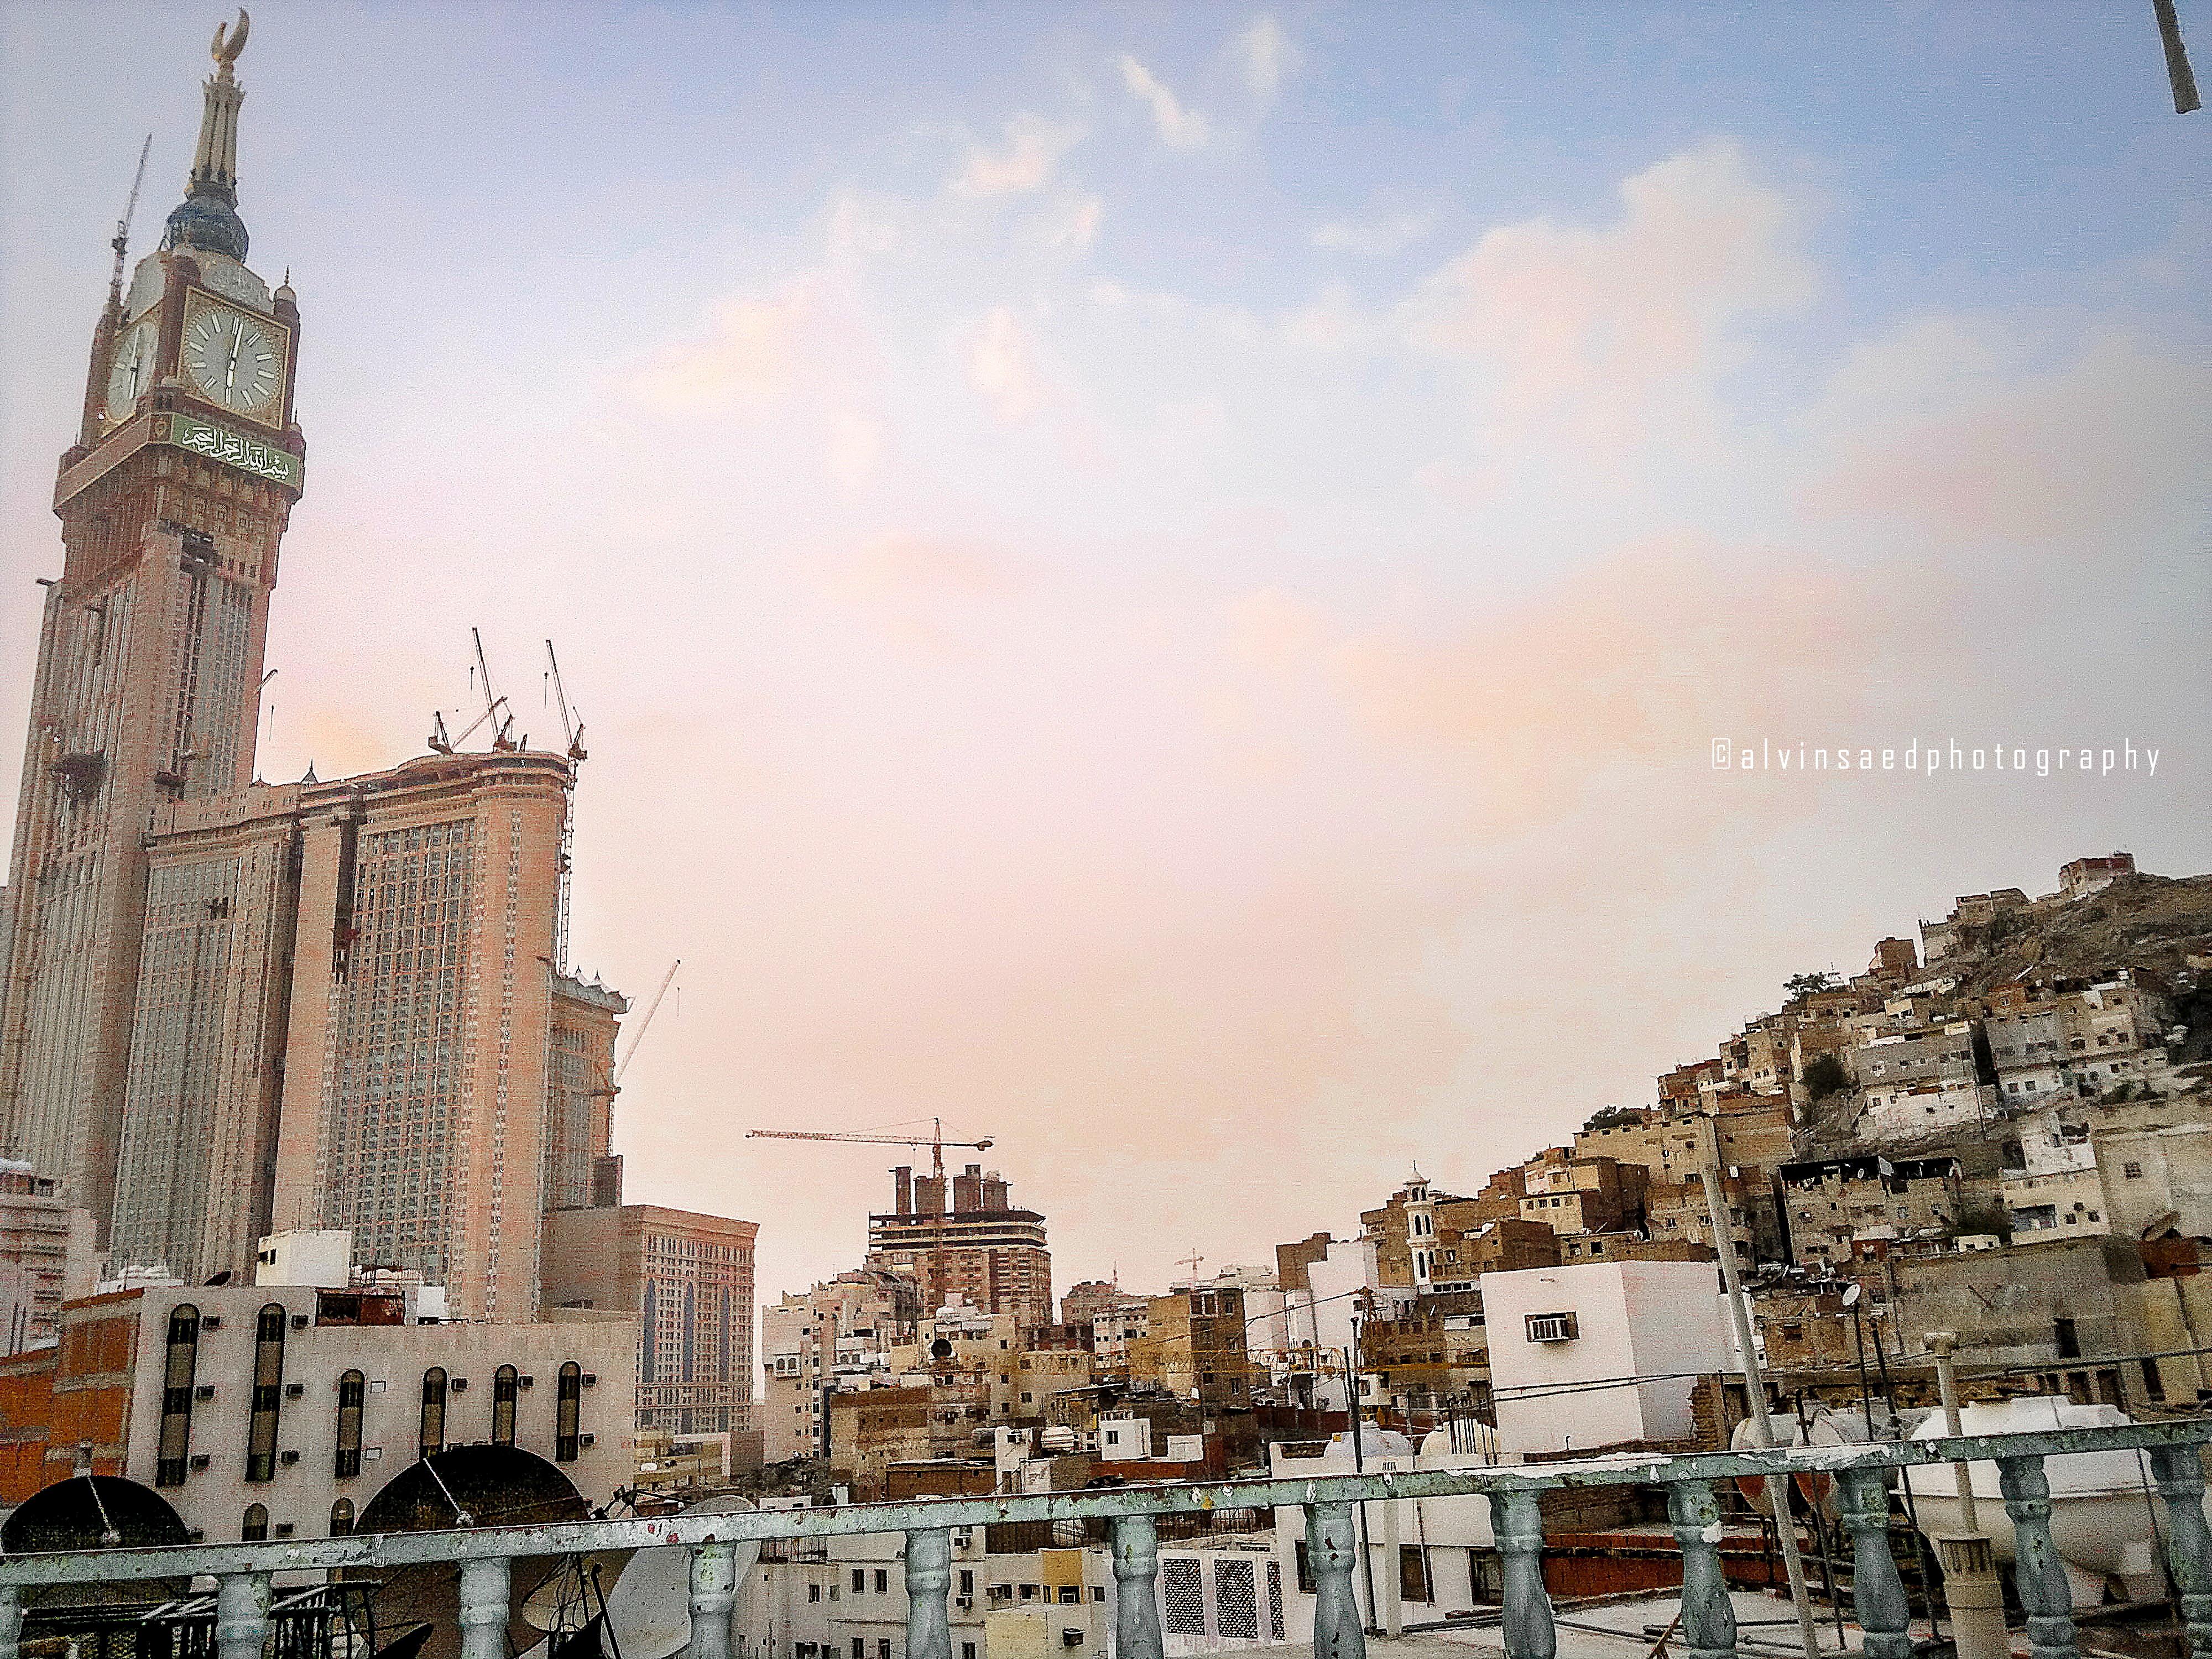 Makkah Clock Tower From the City - Artist- Alvin A. Saed 